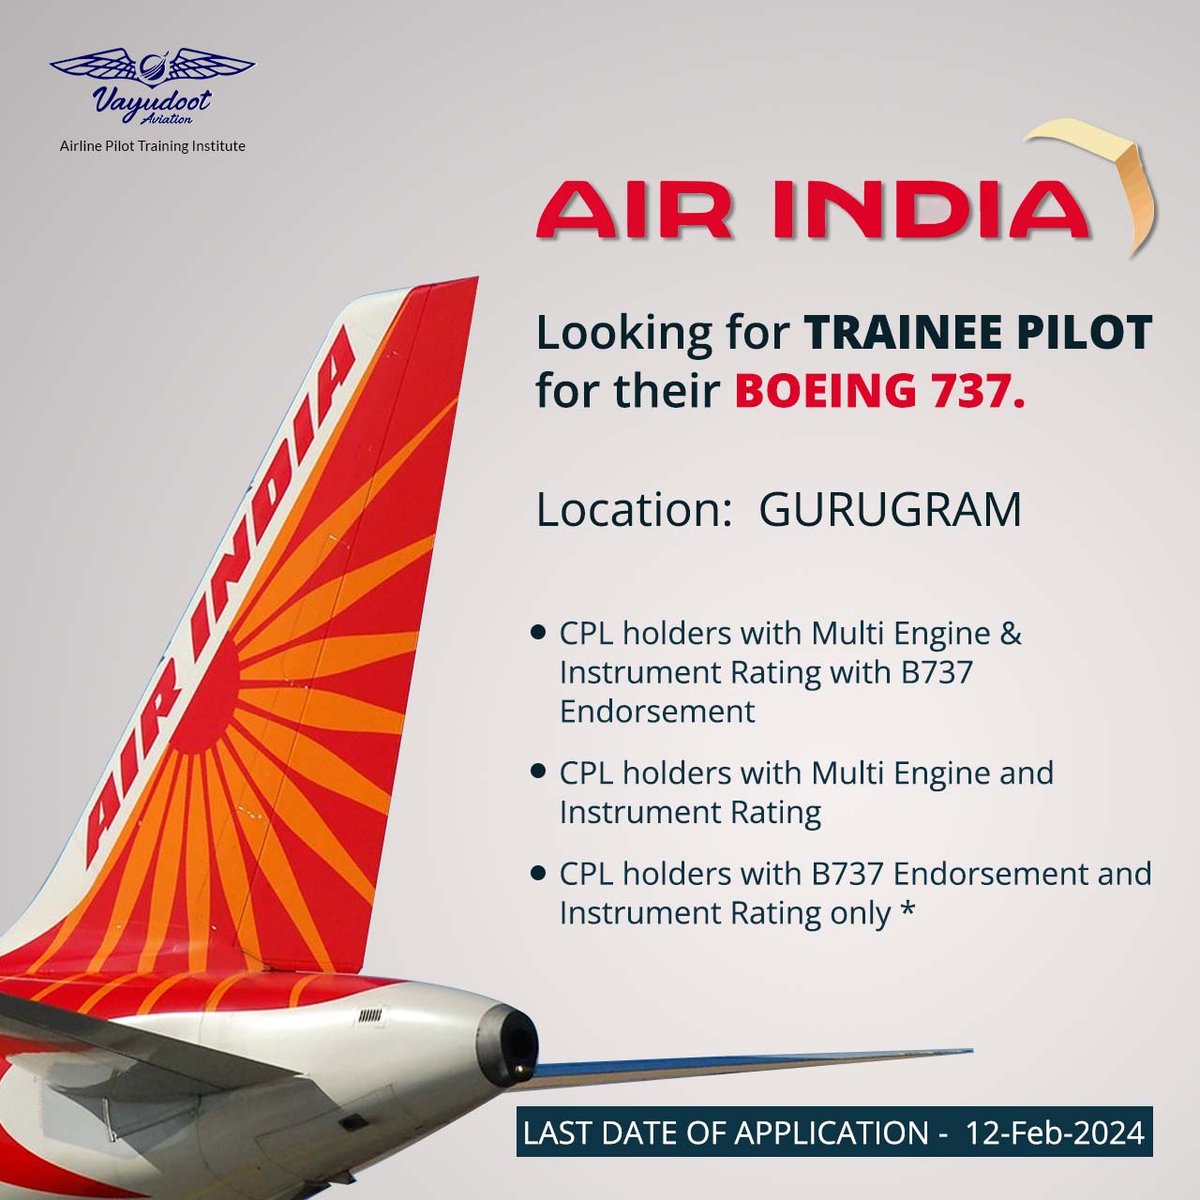 Take the captain's seat with Air India!  Join Air India as a Trainee Pilot for the Boeing 737 at Gurugram and make your aviation dreams a reality.📈✈

#vayudootaviation #pilottraining #pilotcareers #Flyhigh #avgeek #pilotlife #aviation #cpl #dcga.